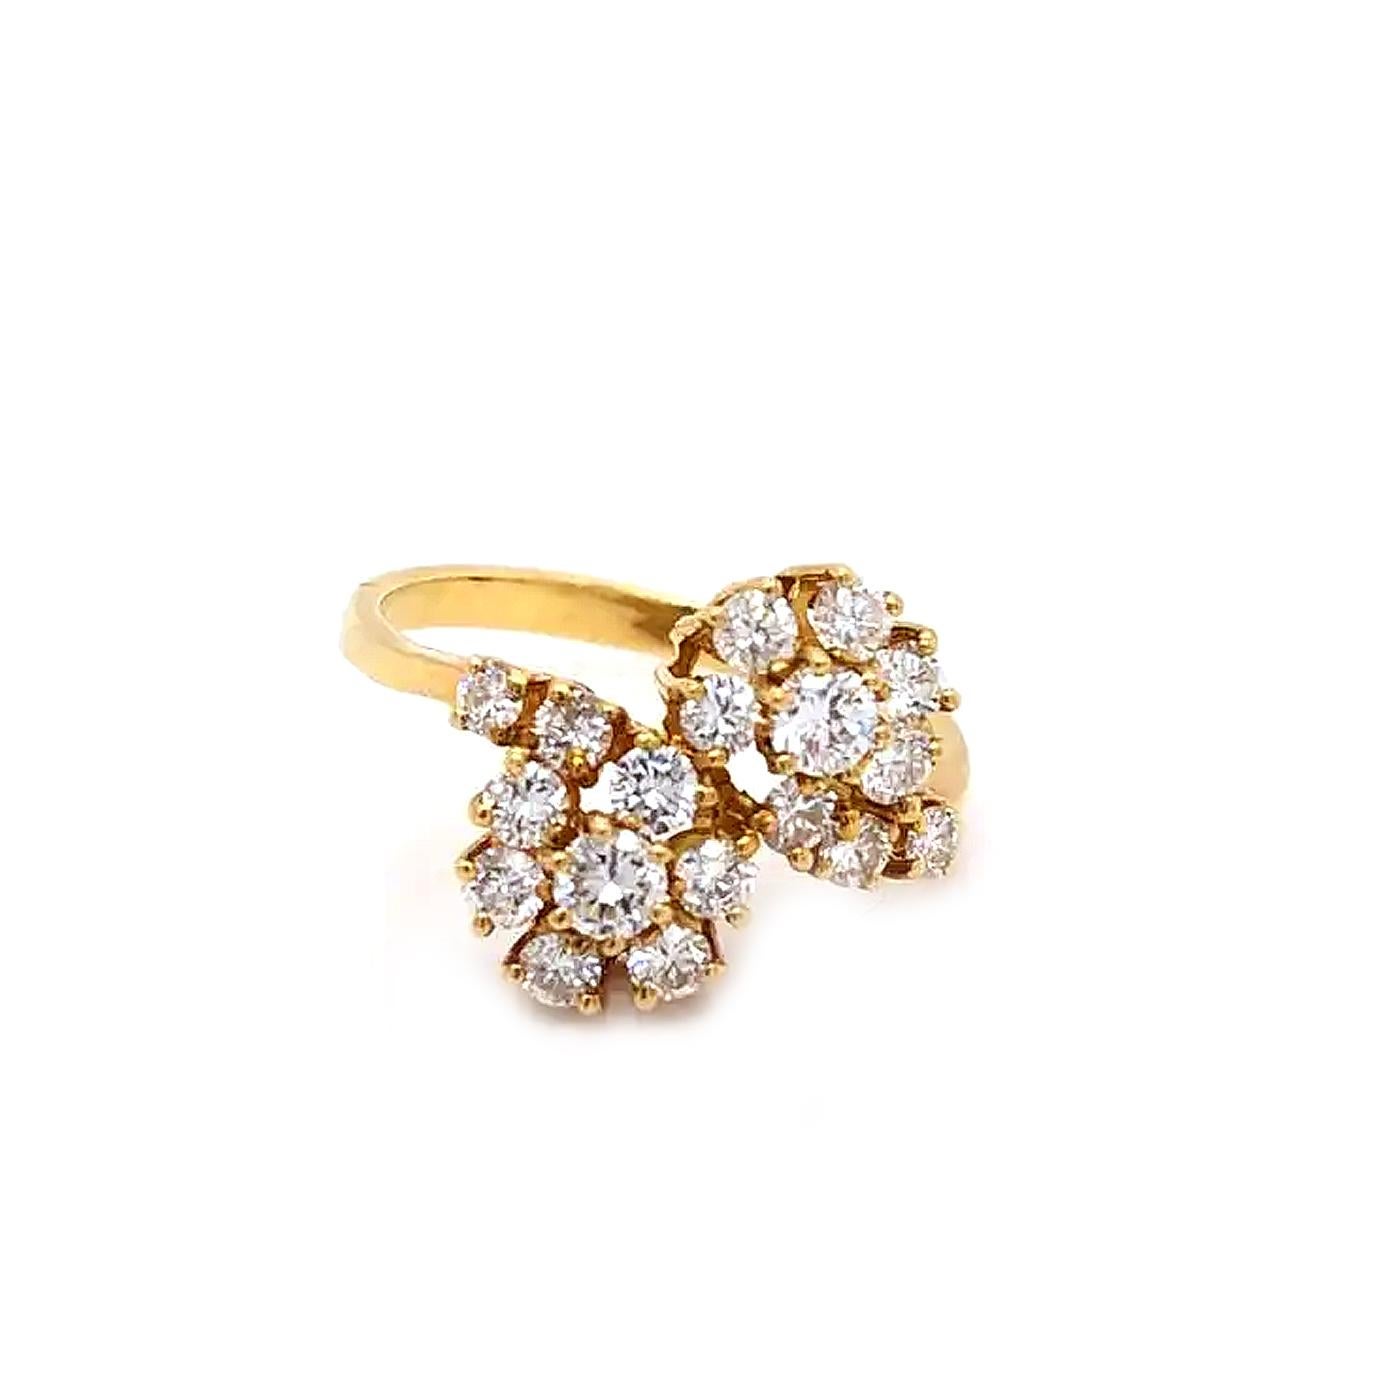 A glamorous piece you'll cherish. In a stunning setting, this Cluster Diamond Ring features a stacked design with round-cut diamonds at every level (1ct 18 Stones).
This ring is made in 18k yellow gold with D-E Color VVS Clarity Diamonds with 4.1